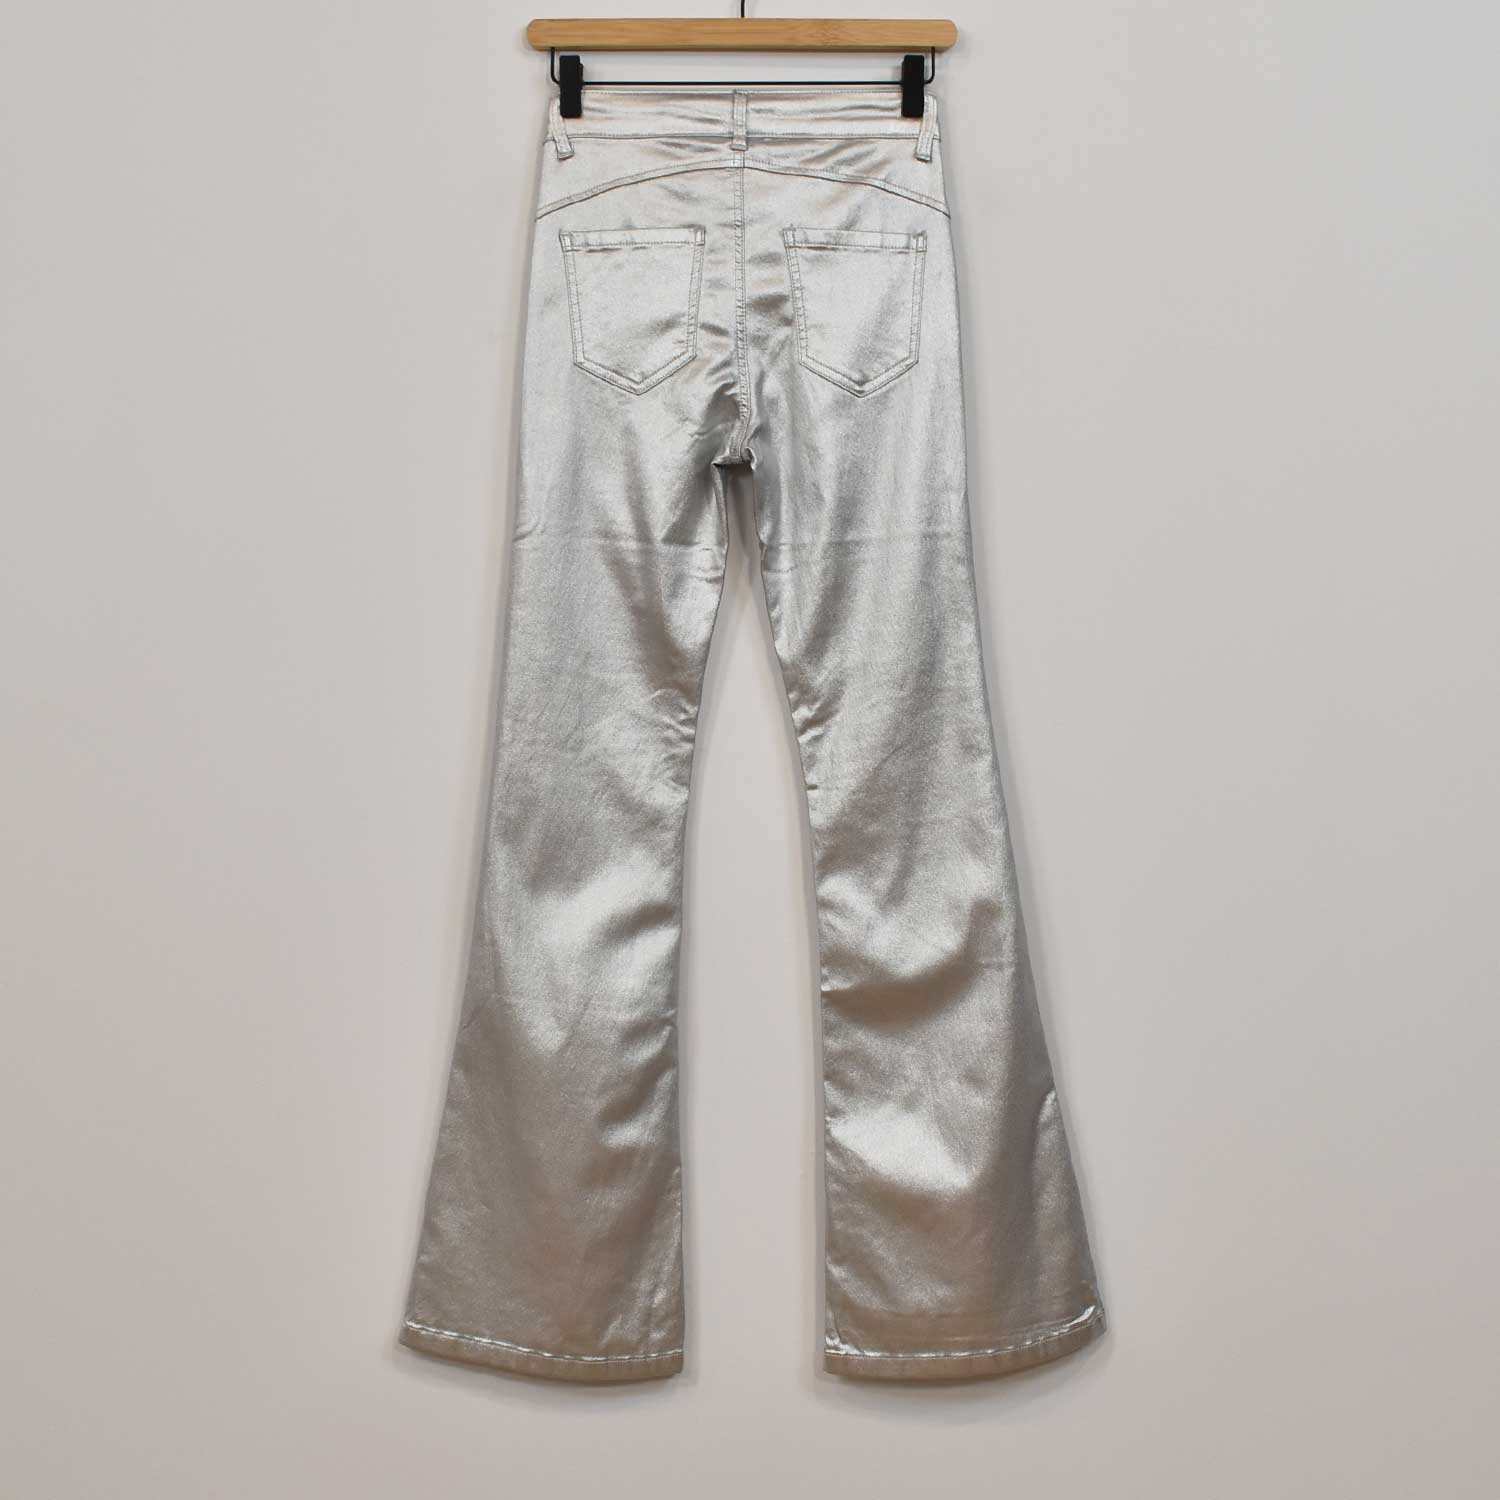 Silver flared pants